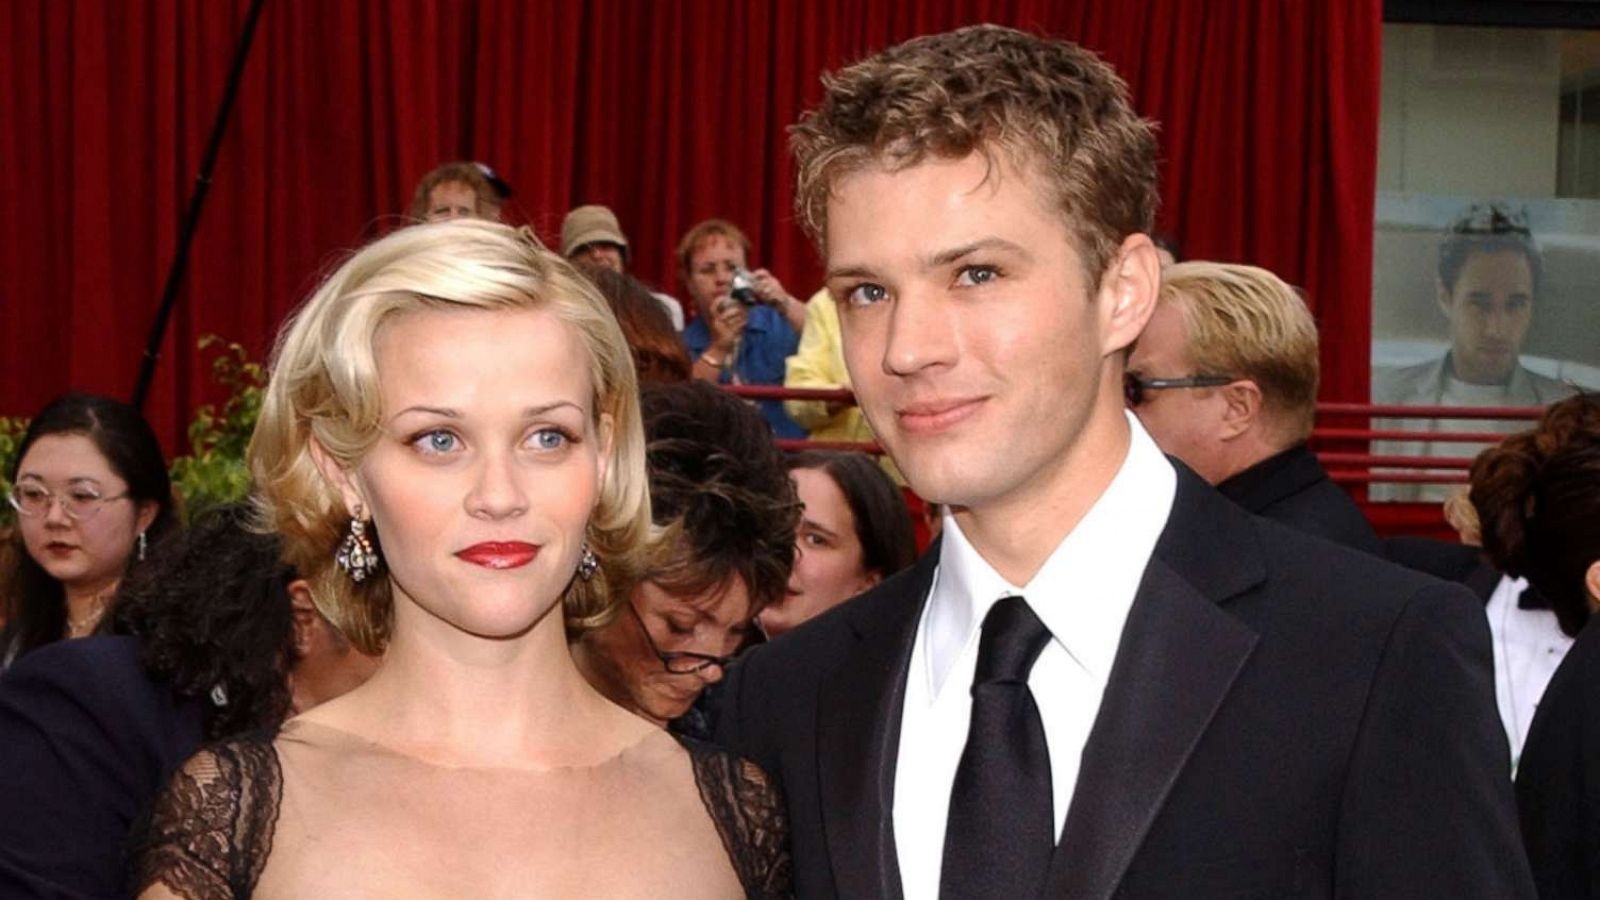 Ryan Phillippe and Reese Witherspoon at Oscar